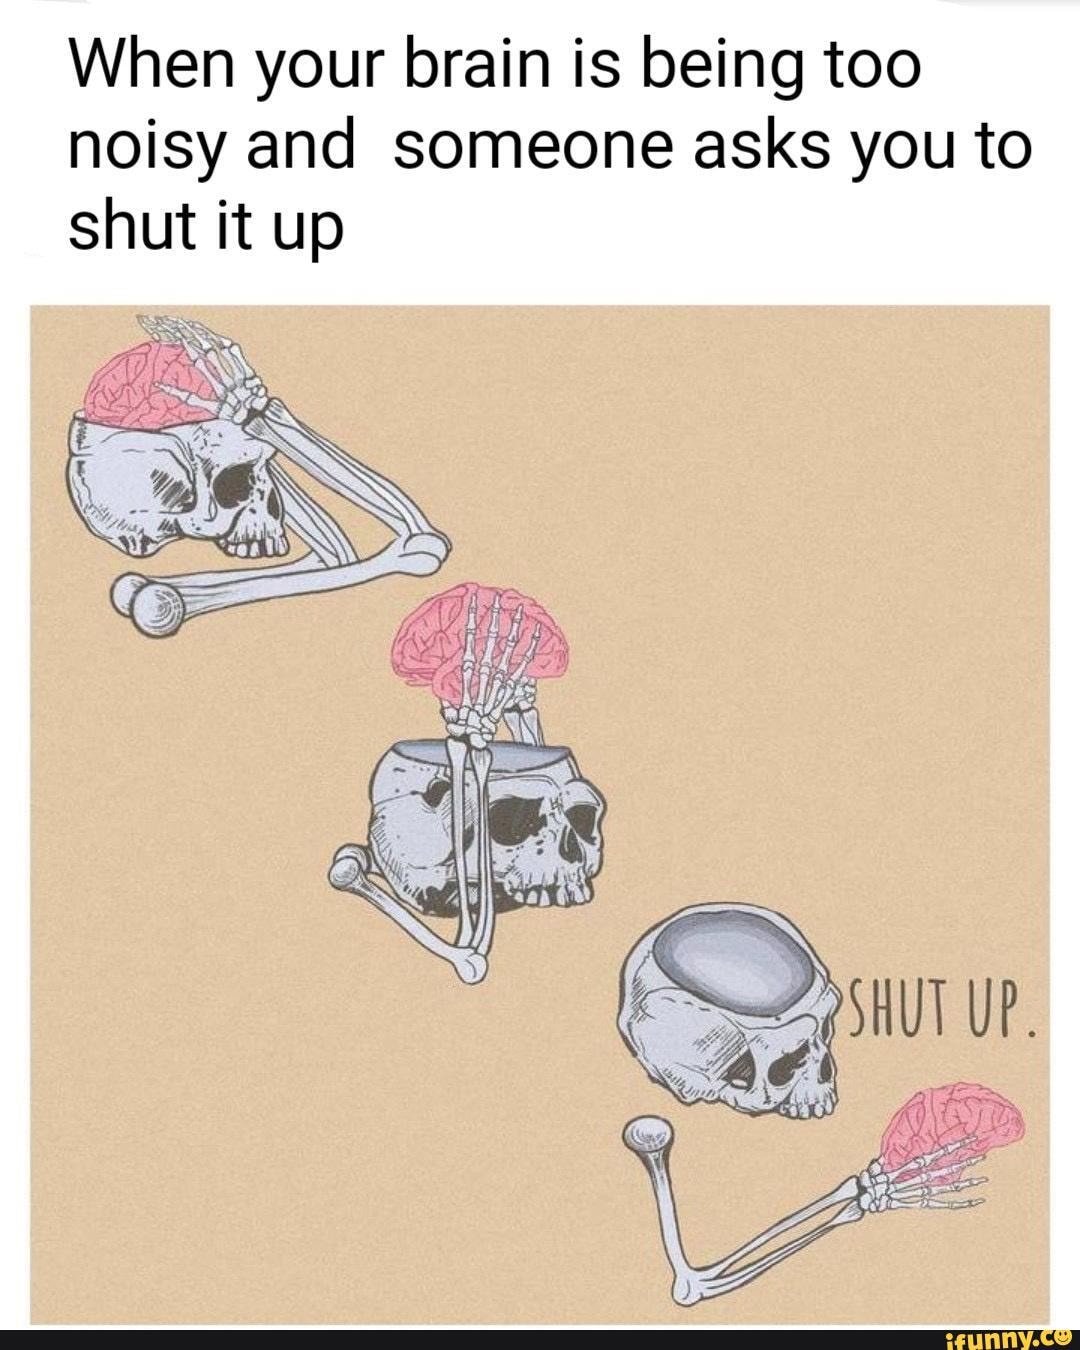 Meme Dumping 1 When Your Brain Is Being Too Noisy And Someone Asks You To Shut It Up